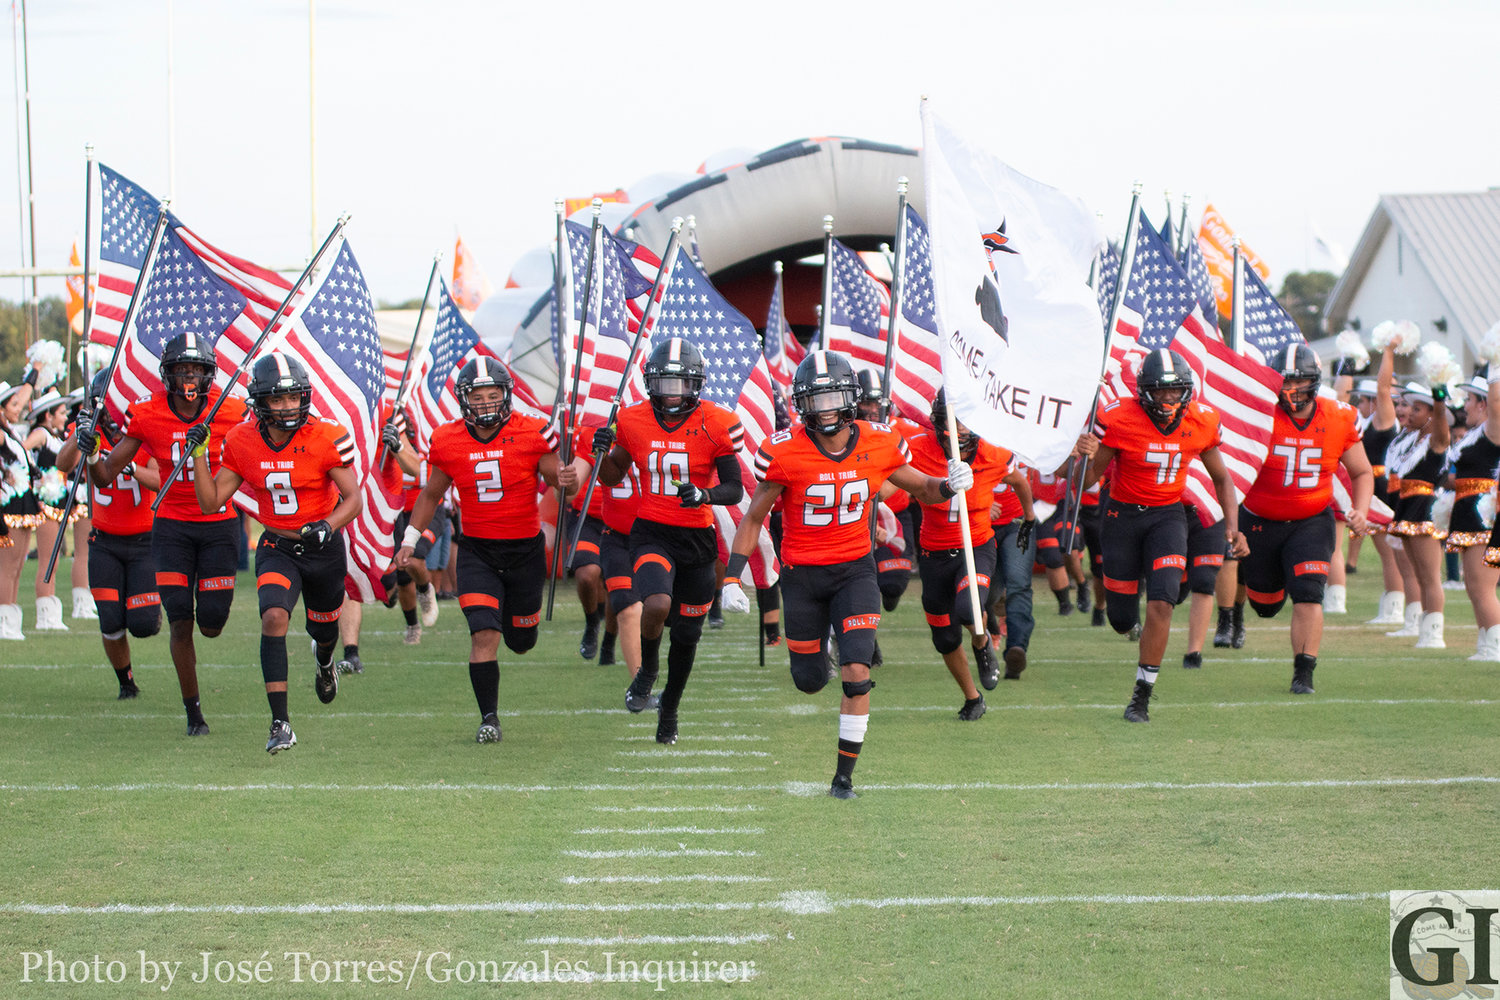 The Gonzales Apaches travel to Austin where they face the Crockett Cougars Friday, Sept. 6 at 7:30 p.m.